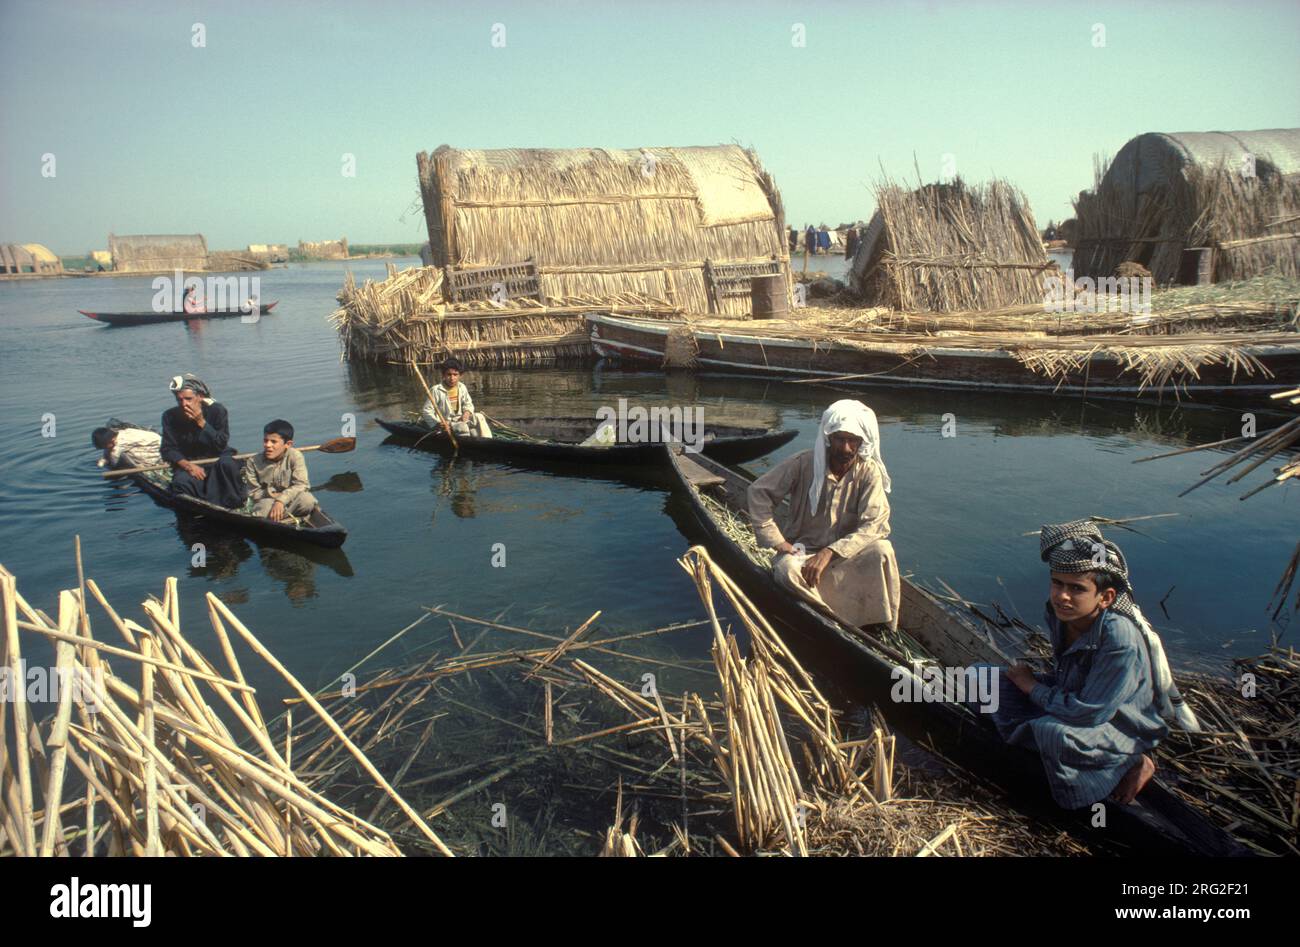 Marsh Arabs Iraq. Marsh Arab men in boats with children. Transport between islands known as dibin. Traditional reed island houses. Rivers Tigris and Euphrates wetlands, Hammar marshes. Southern Iraq 1980s 1984 HOMER SYKES Stock Photo